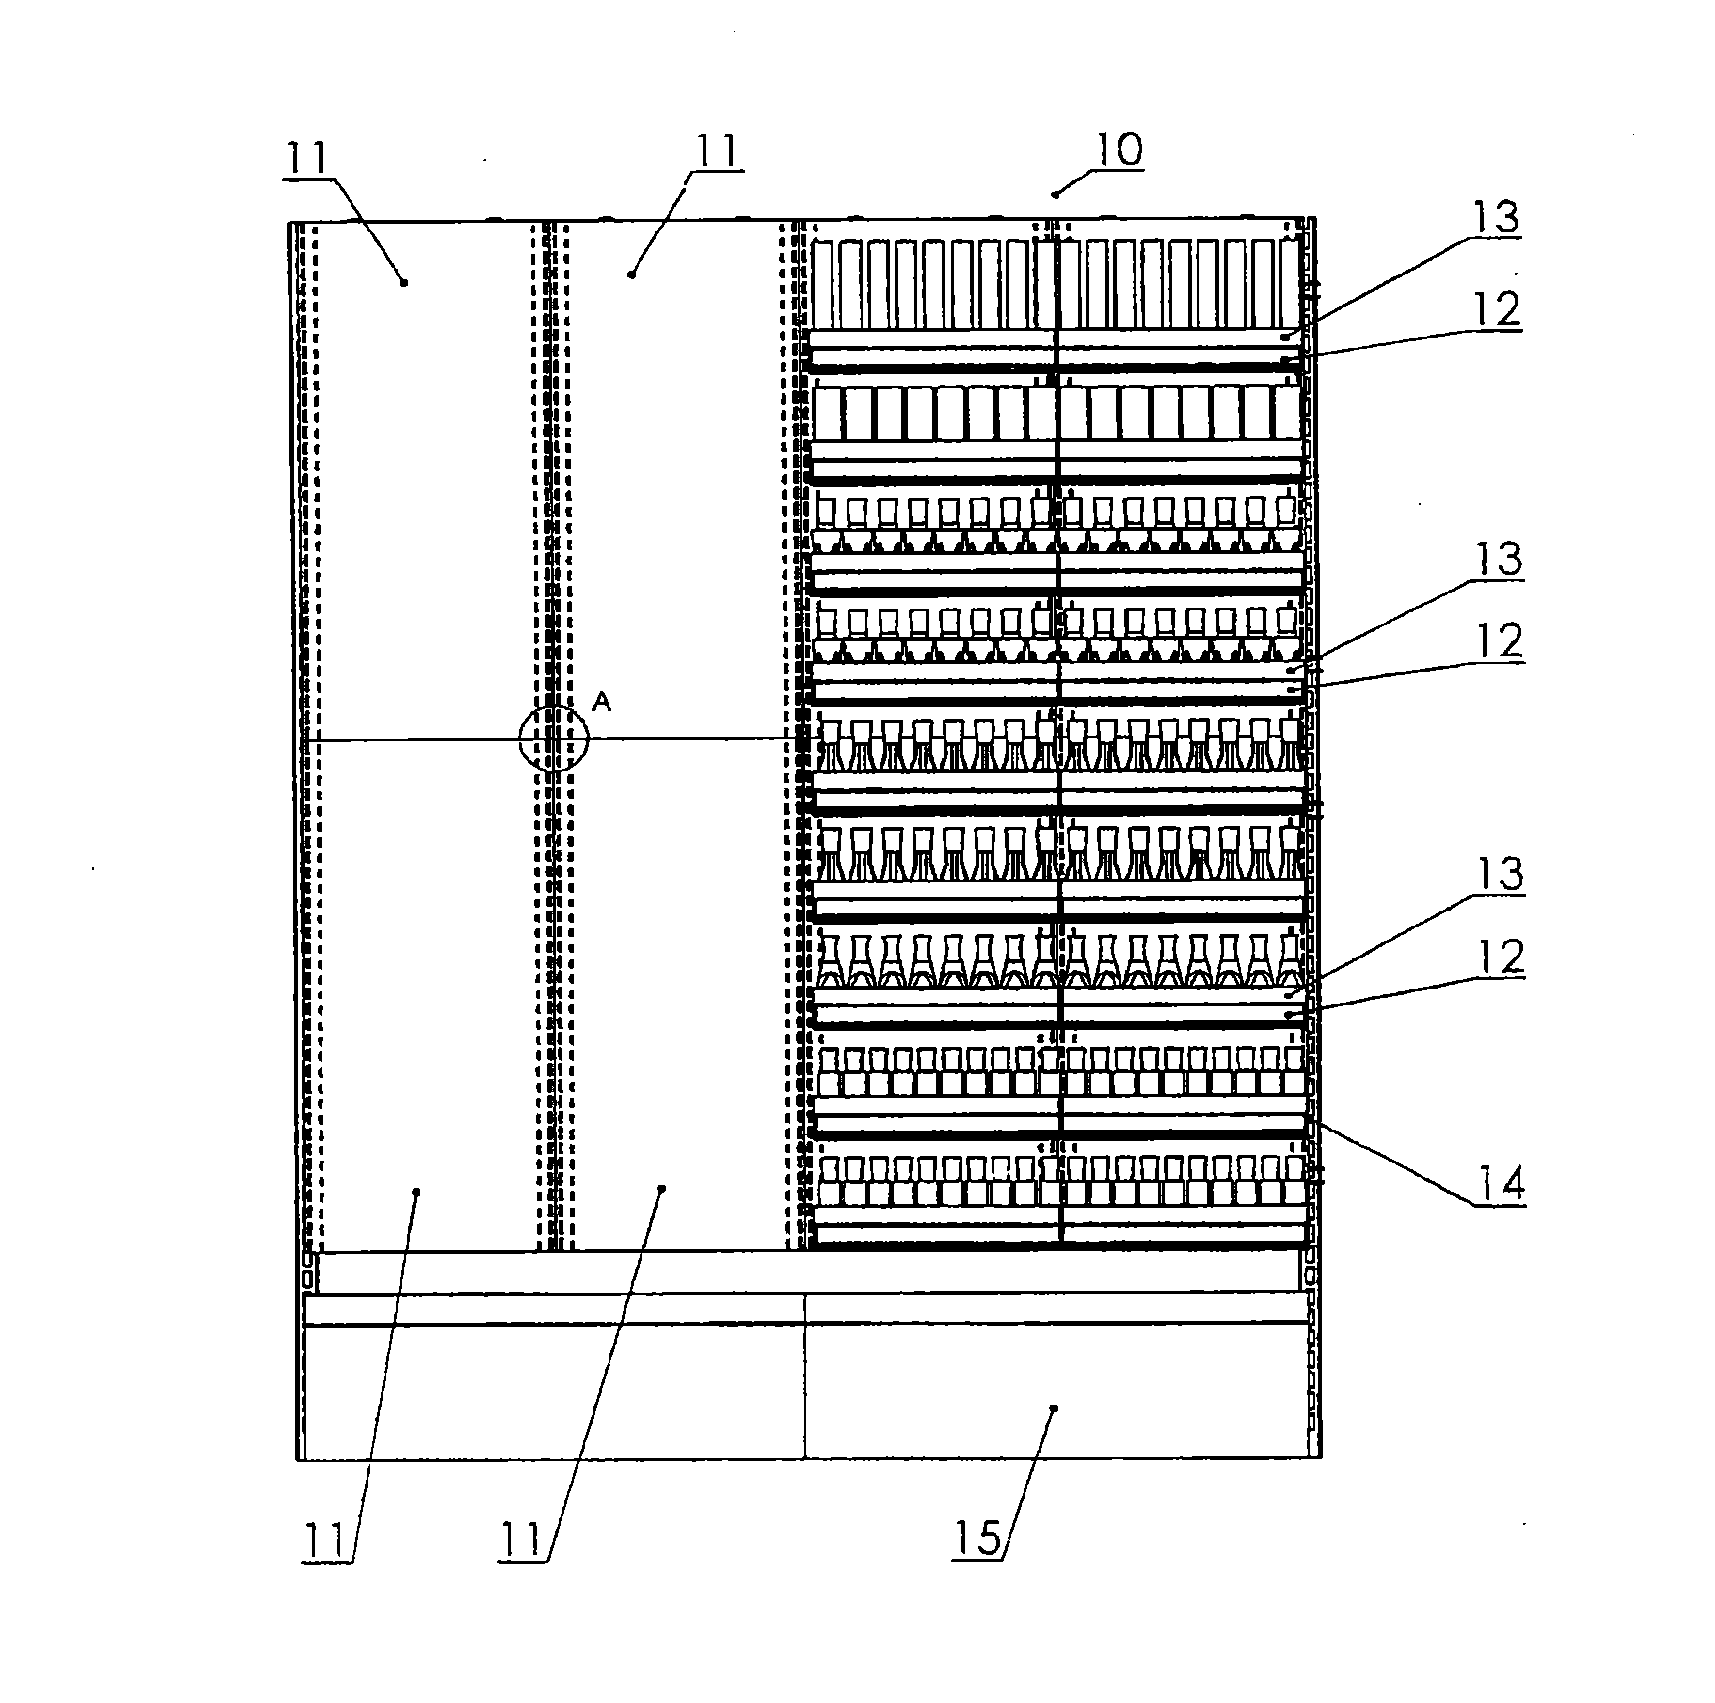 Low voltage plug and play display system